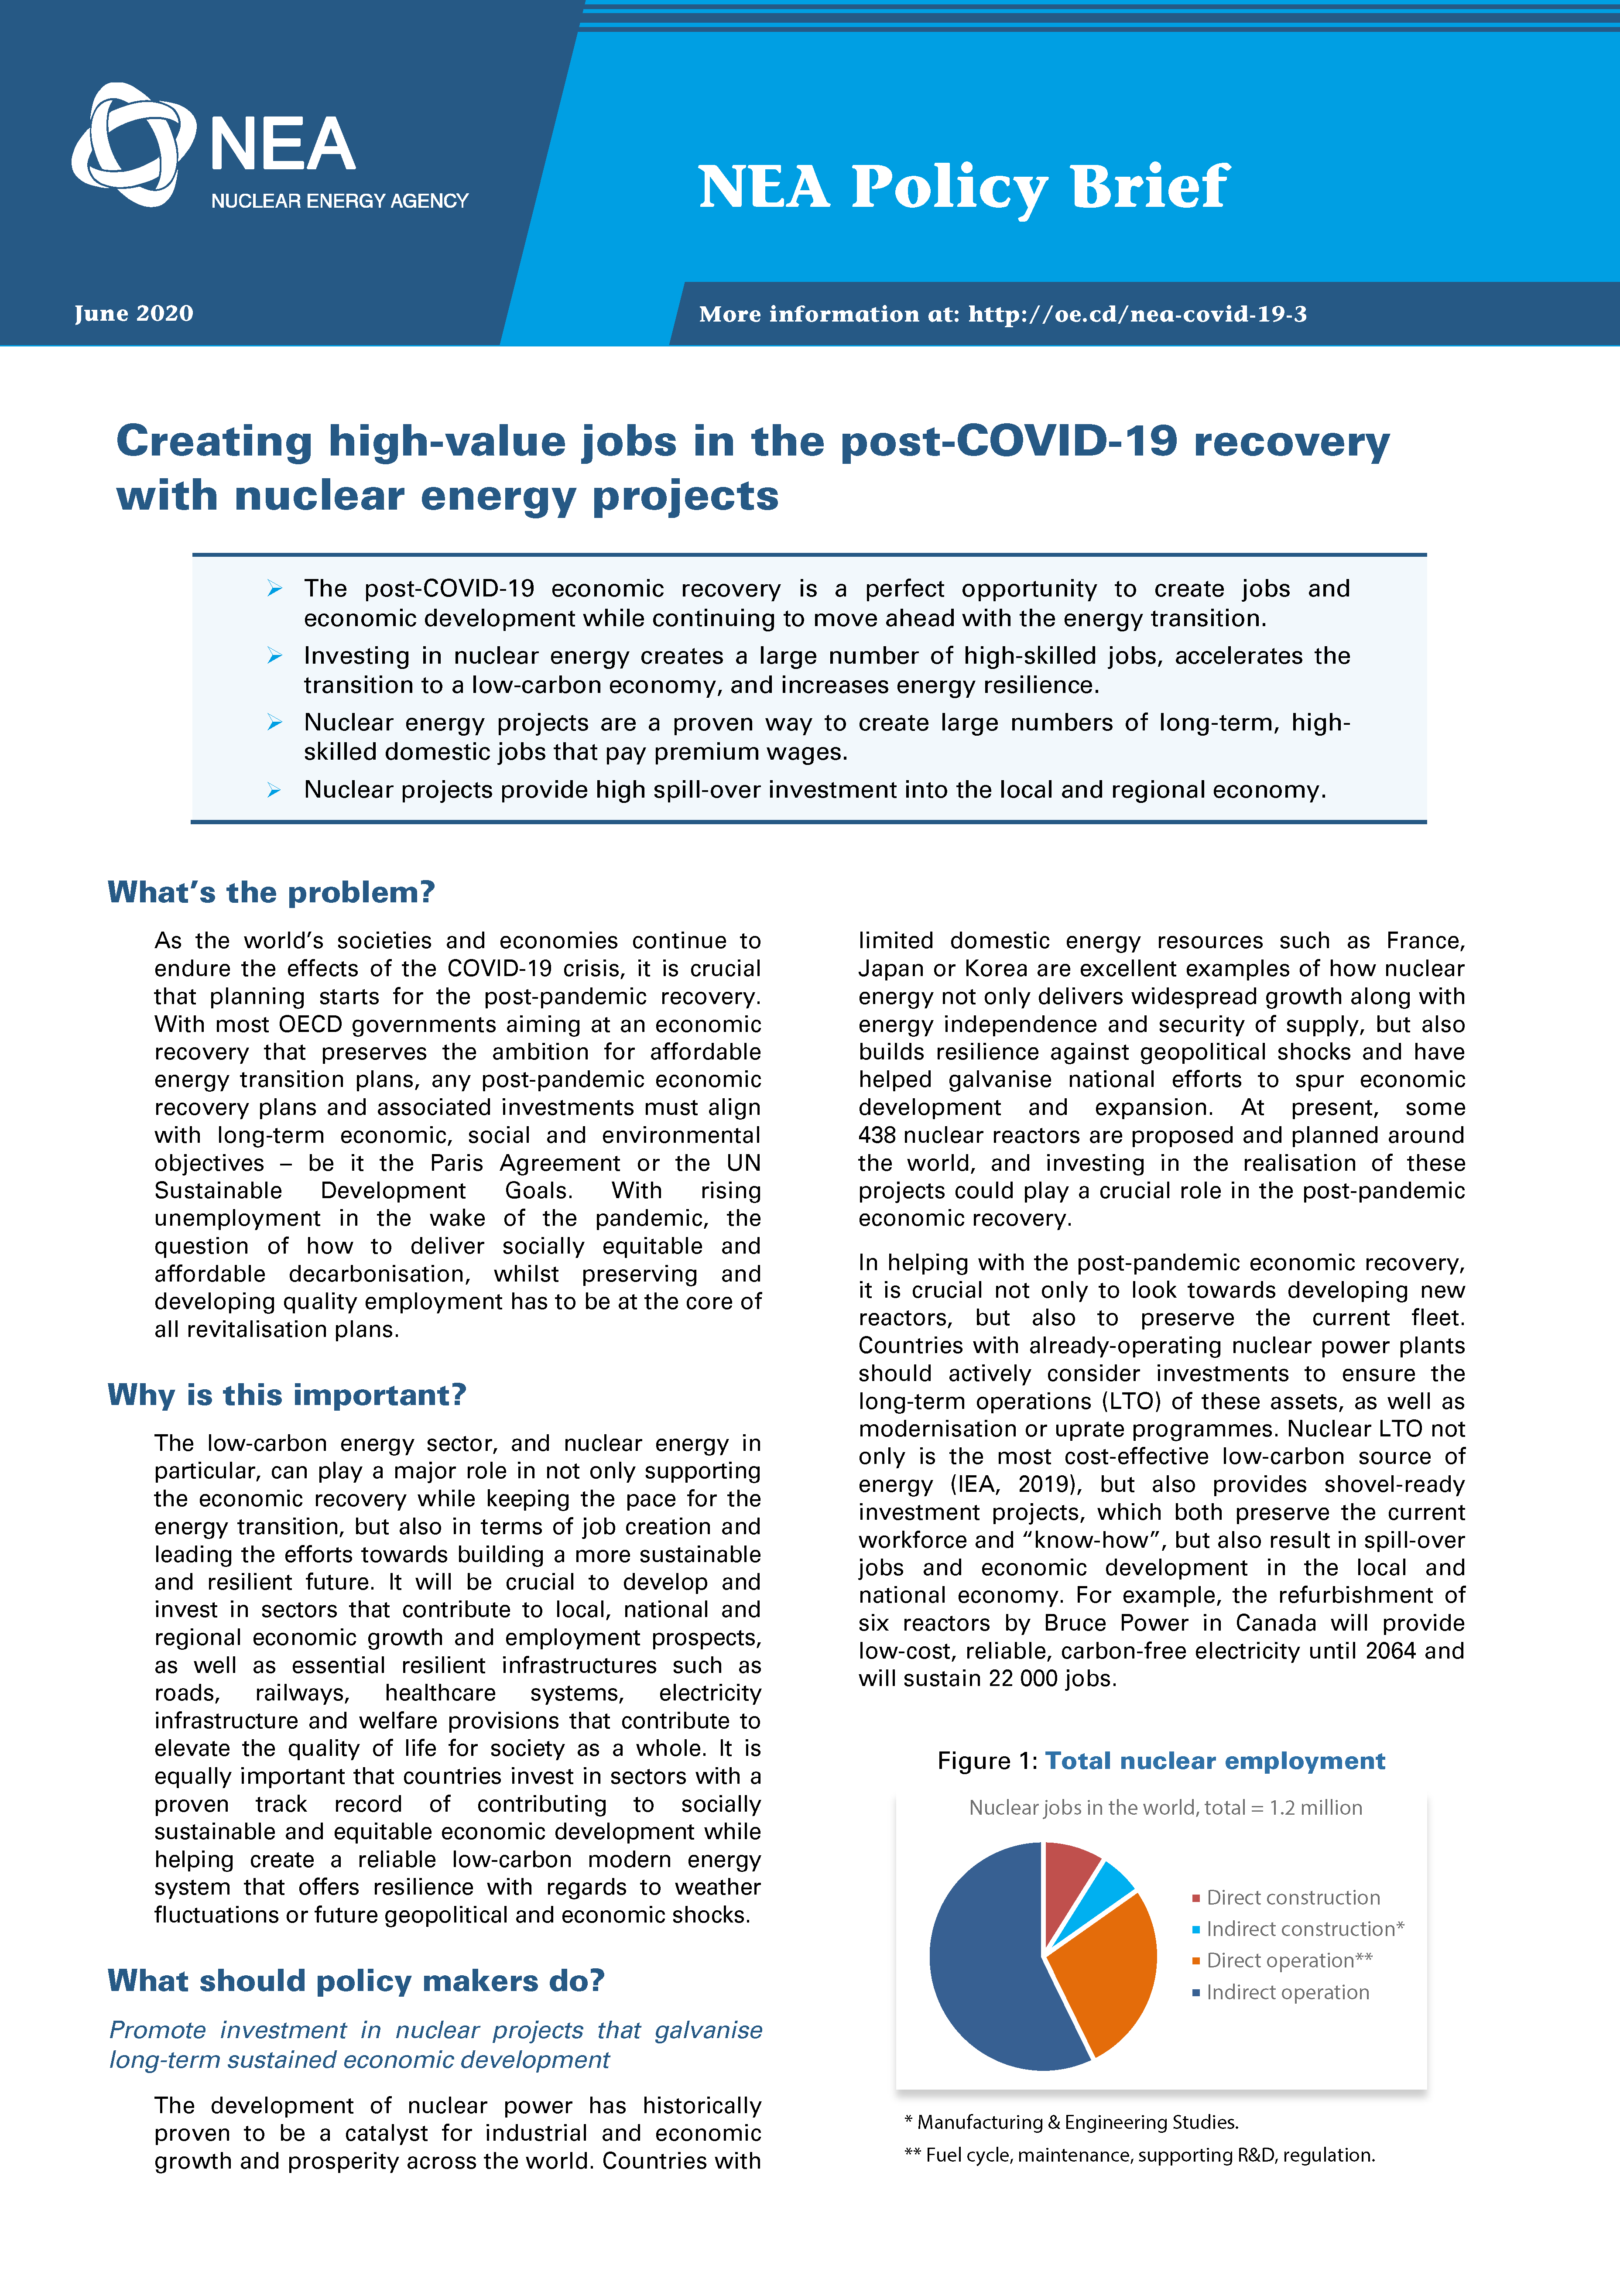 Creating high-value jobs in the post-COVID-19 recovery
			  with nuclear energy projects